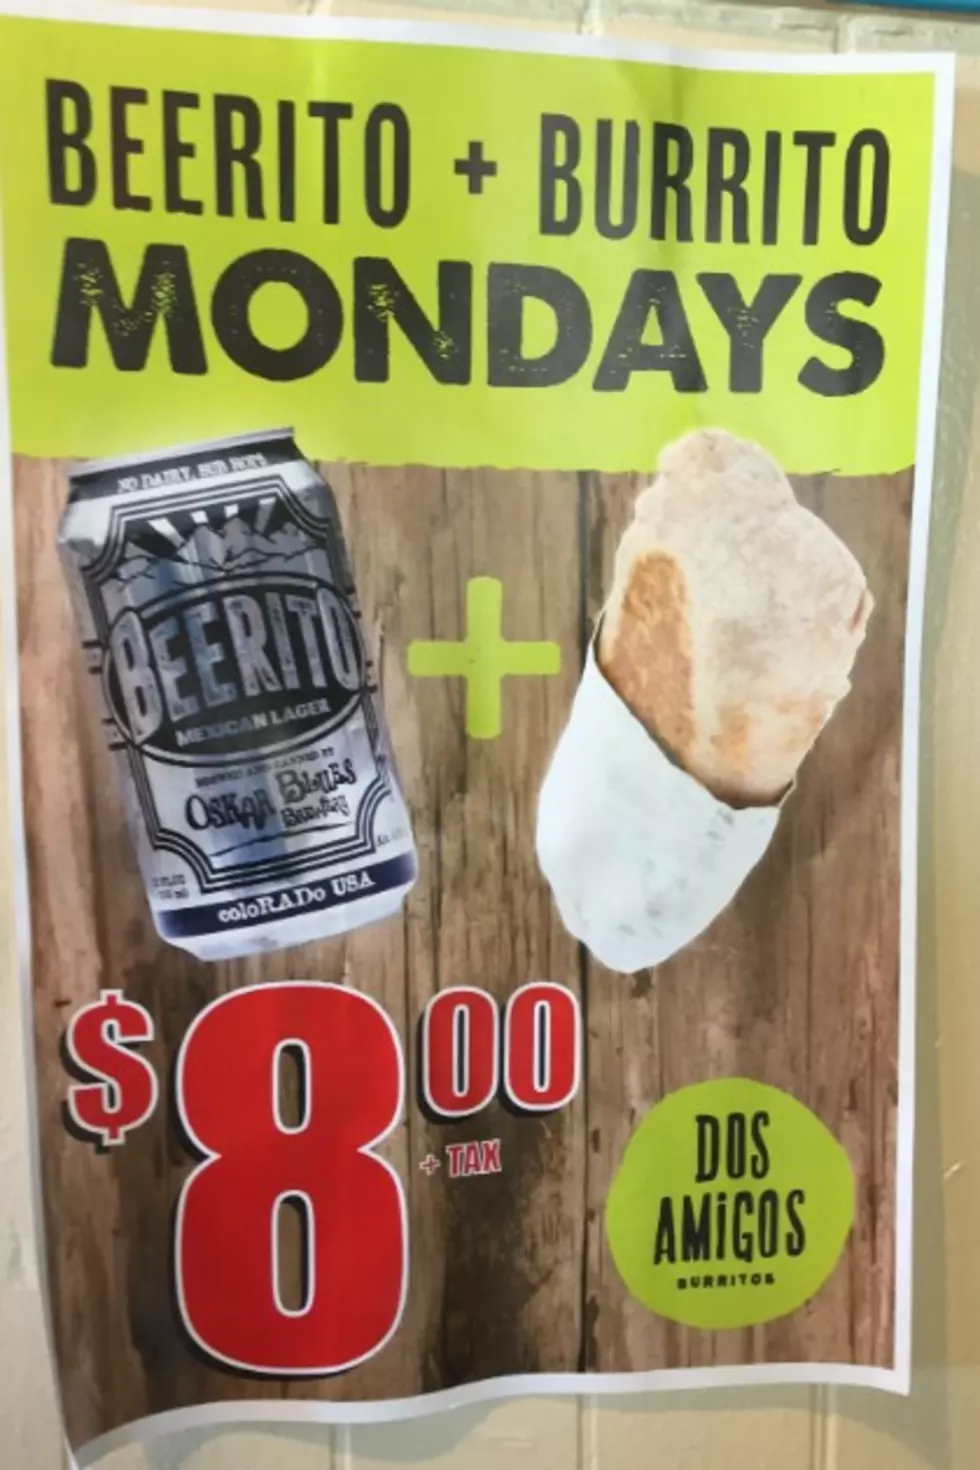 This Beer + Burrito Special At Dos Amigos Is Making Mondays Great Again